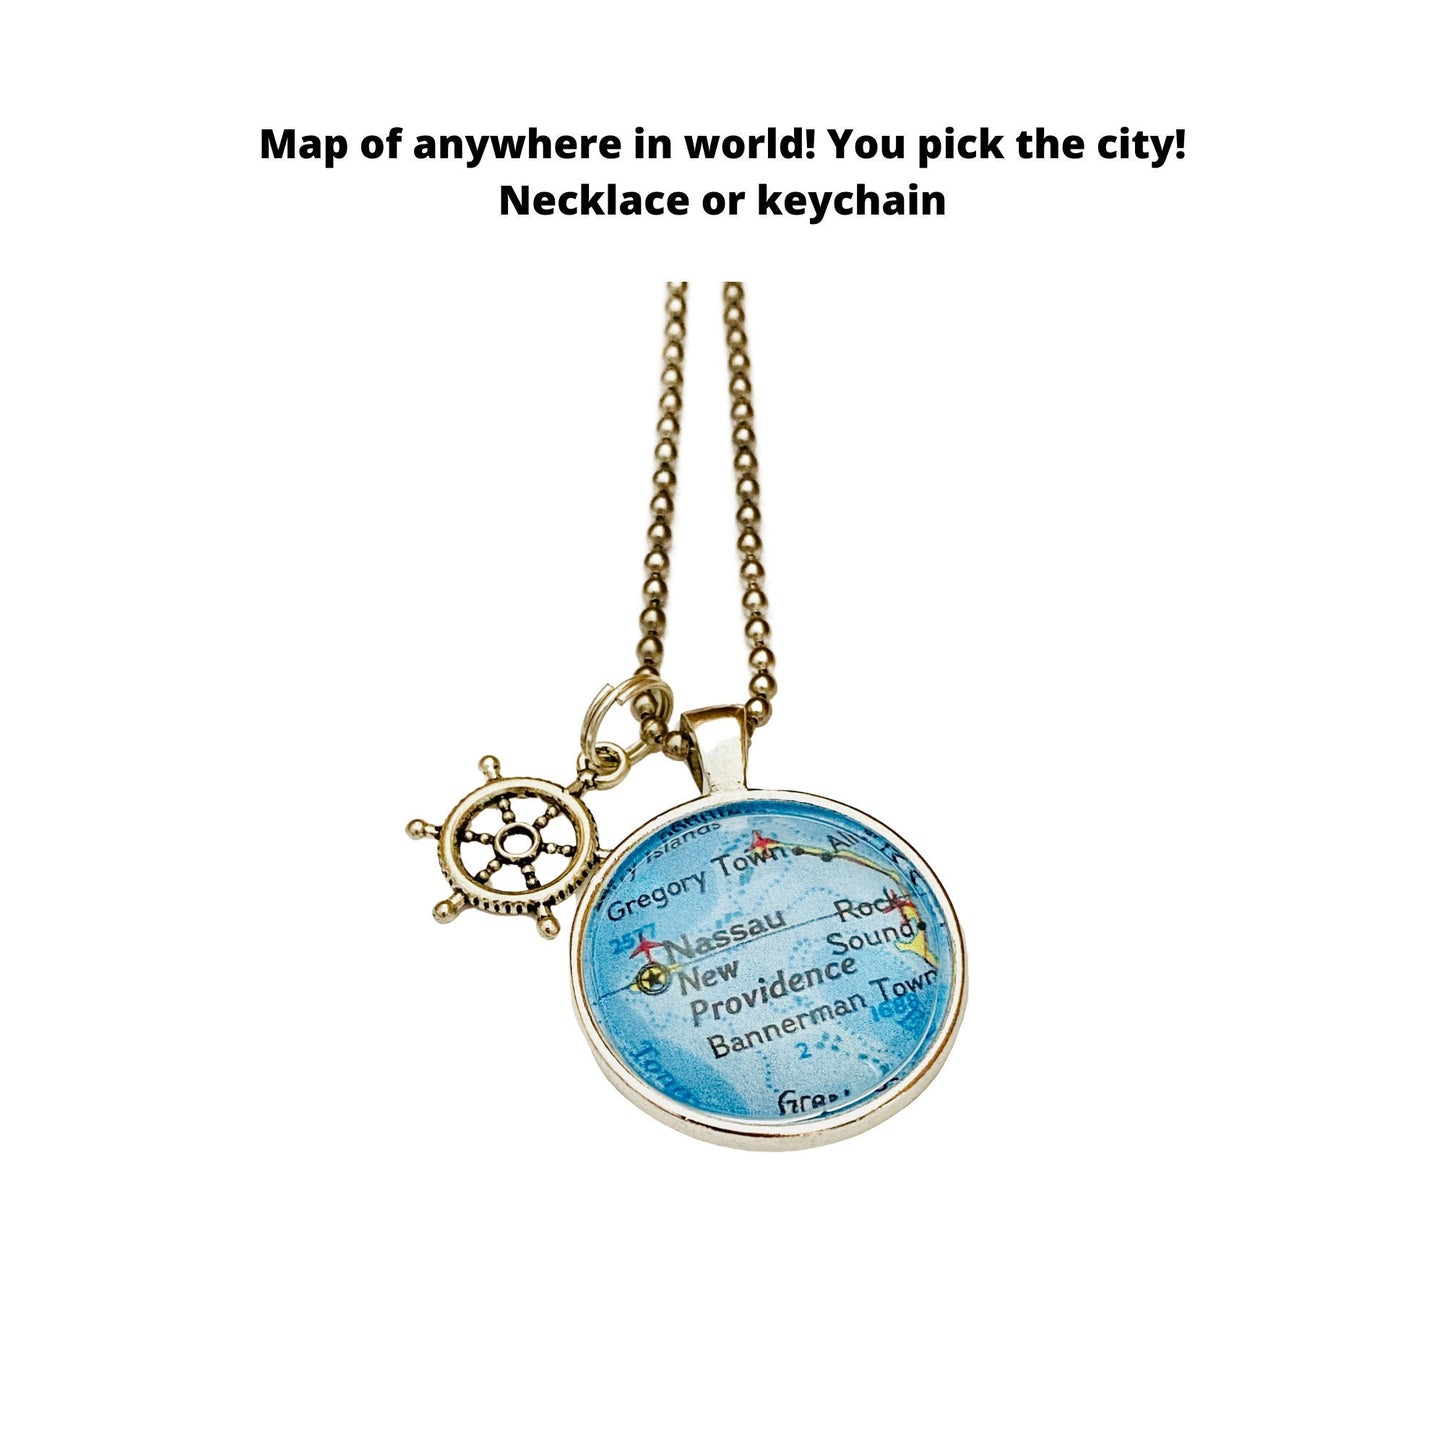 Sailor Gift/ Sailing Jewelry/ Gift for Sailors/ Boating Necklace/ CUSTOM Map Pendant / Sailboat Keychain/ Map Jewelry/ Map Gift / Custom Key